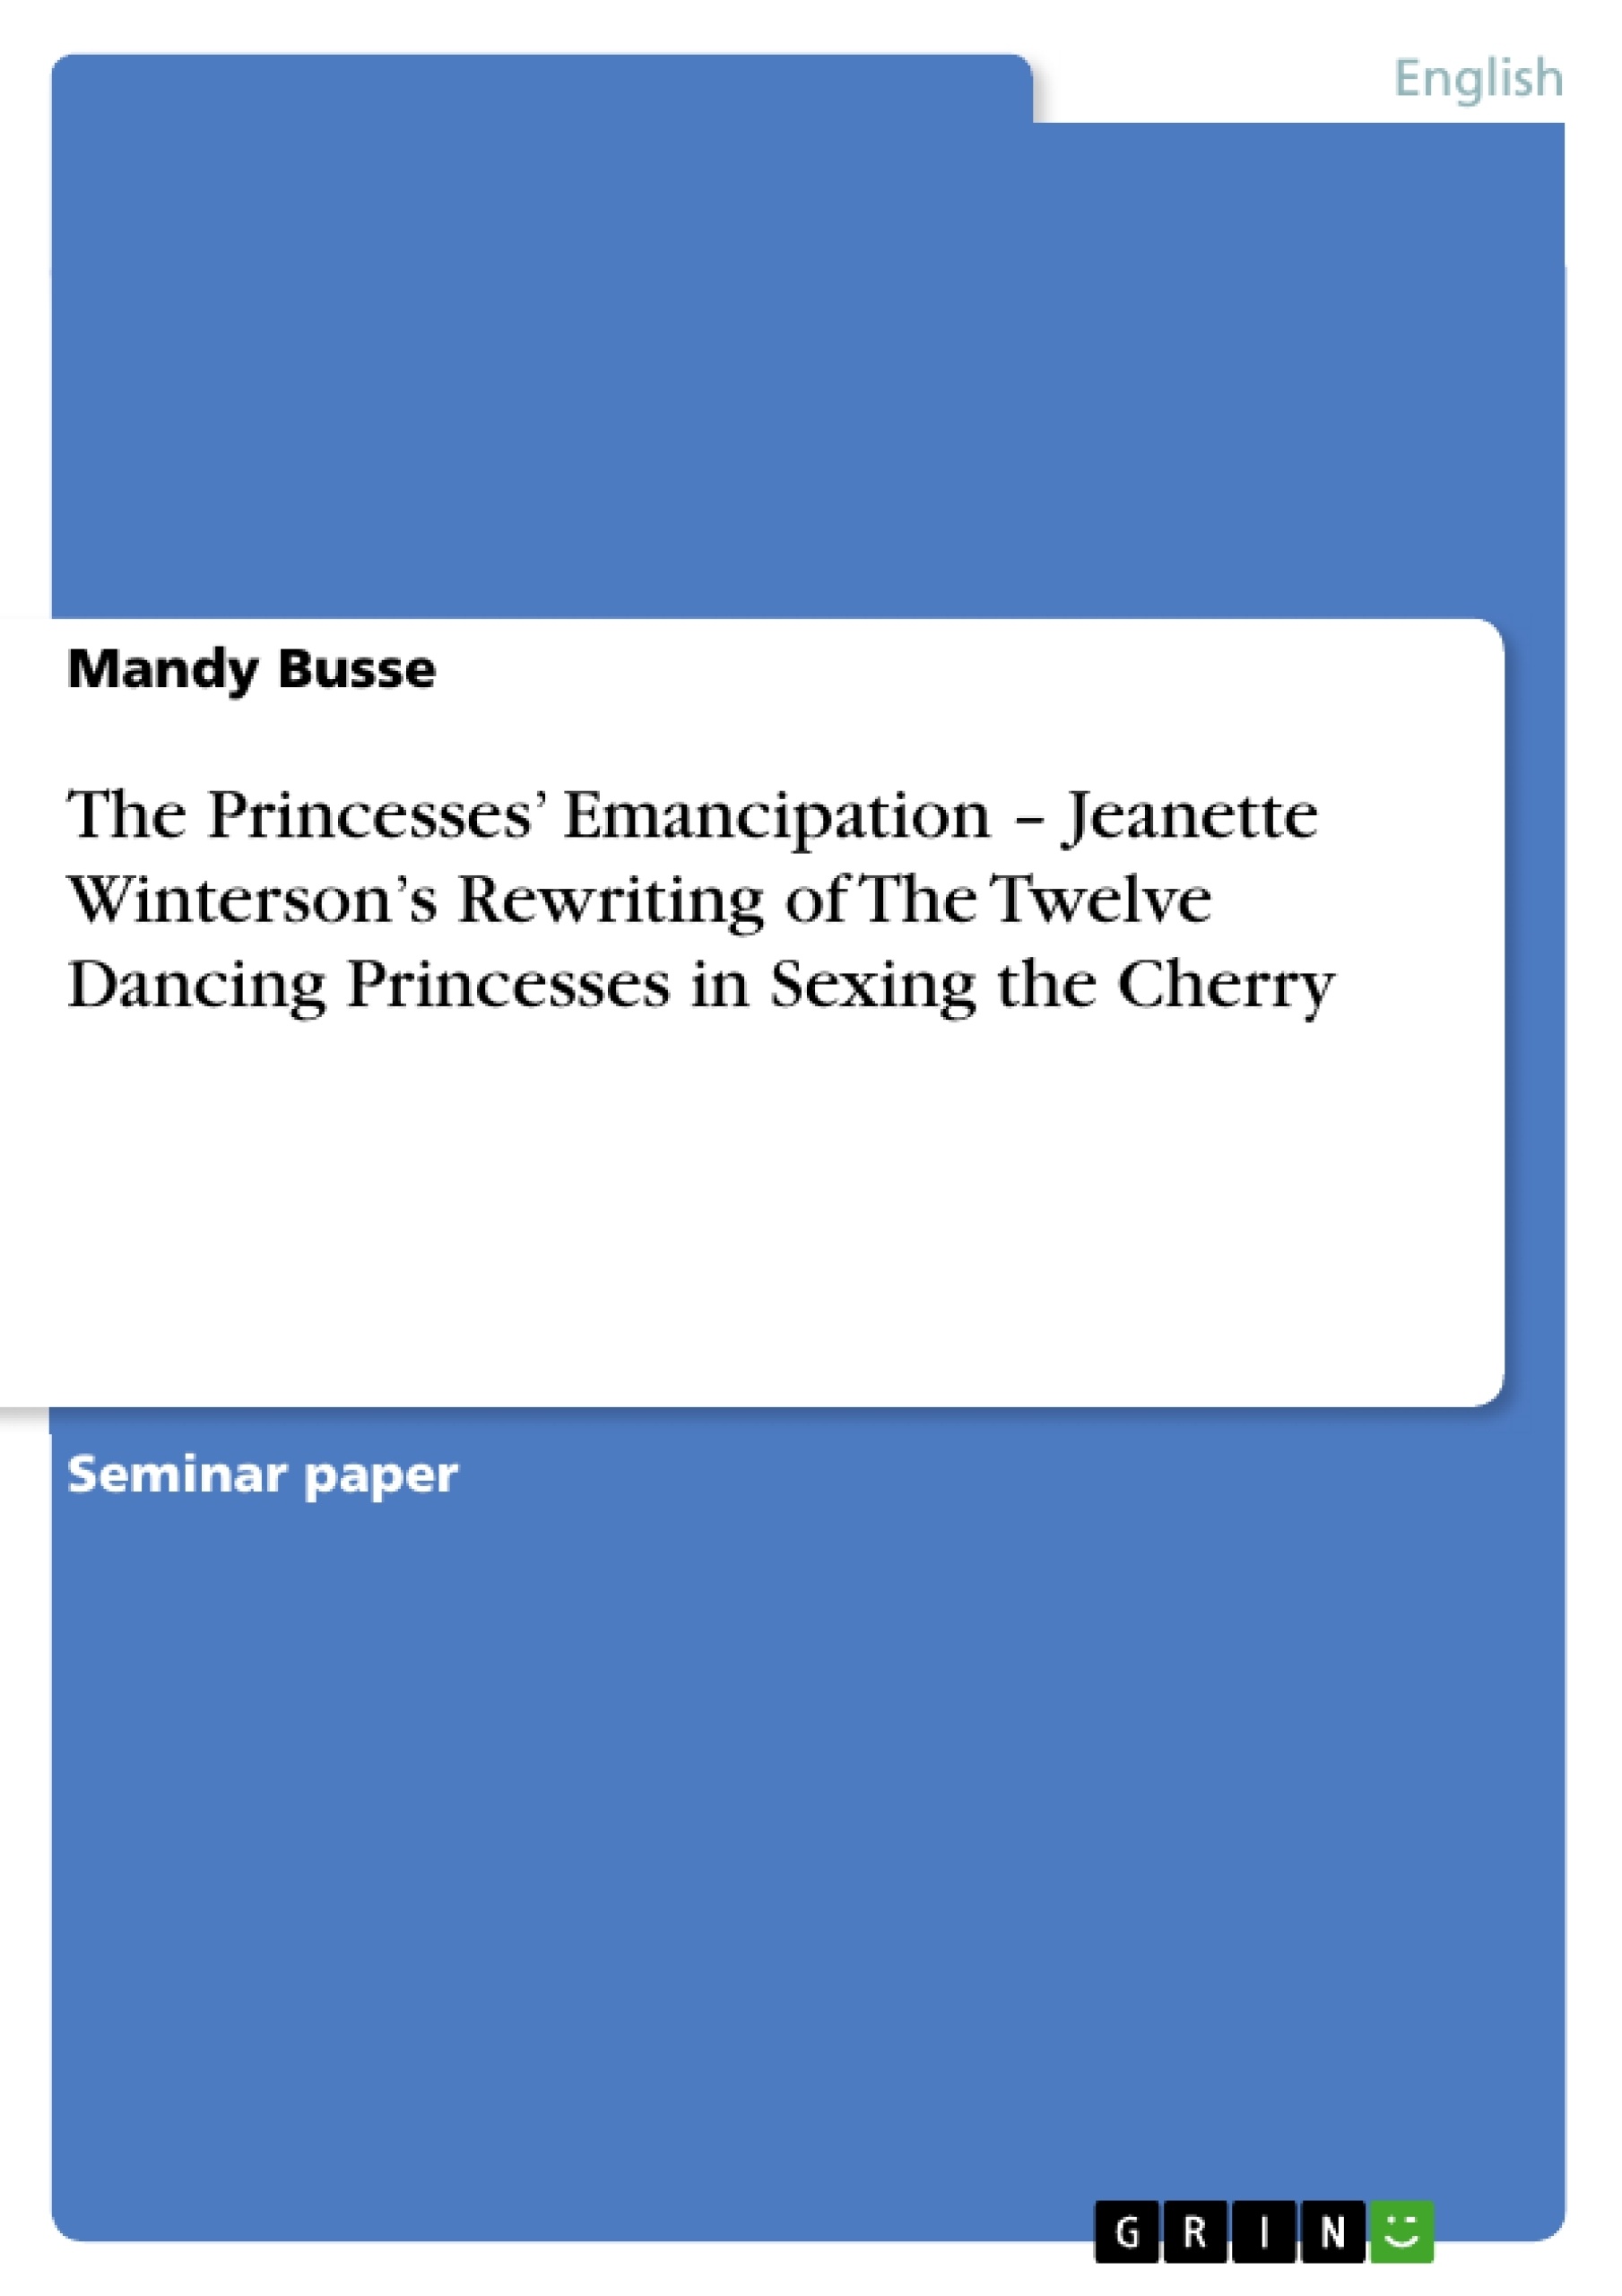 Título: The Princesses’ Emancipation – Jeanette Winterson’s Rewriting of The Twelve Dancing Princesses in Sexing the Cherry